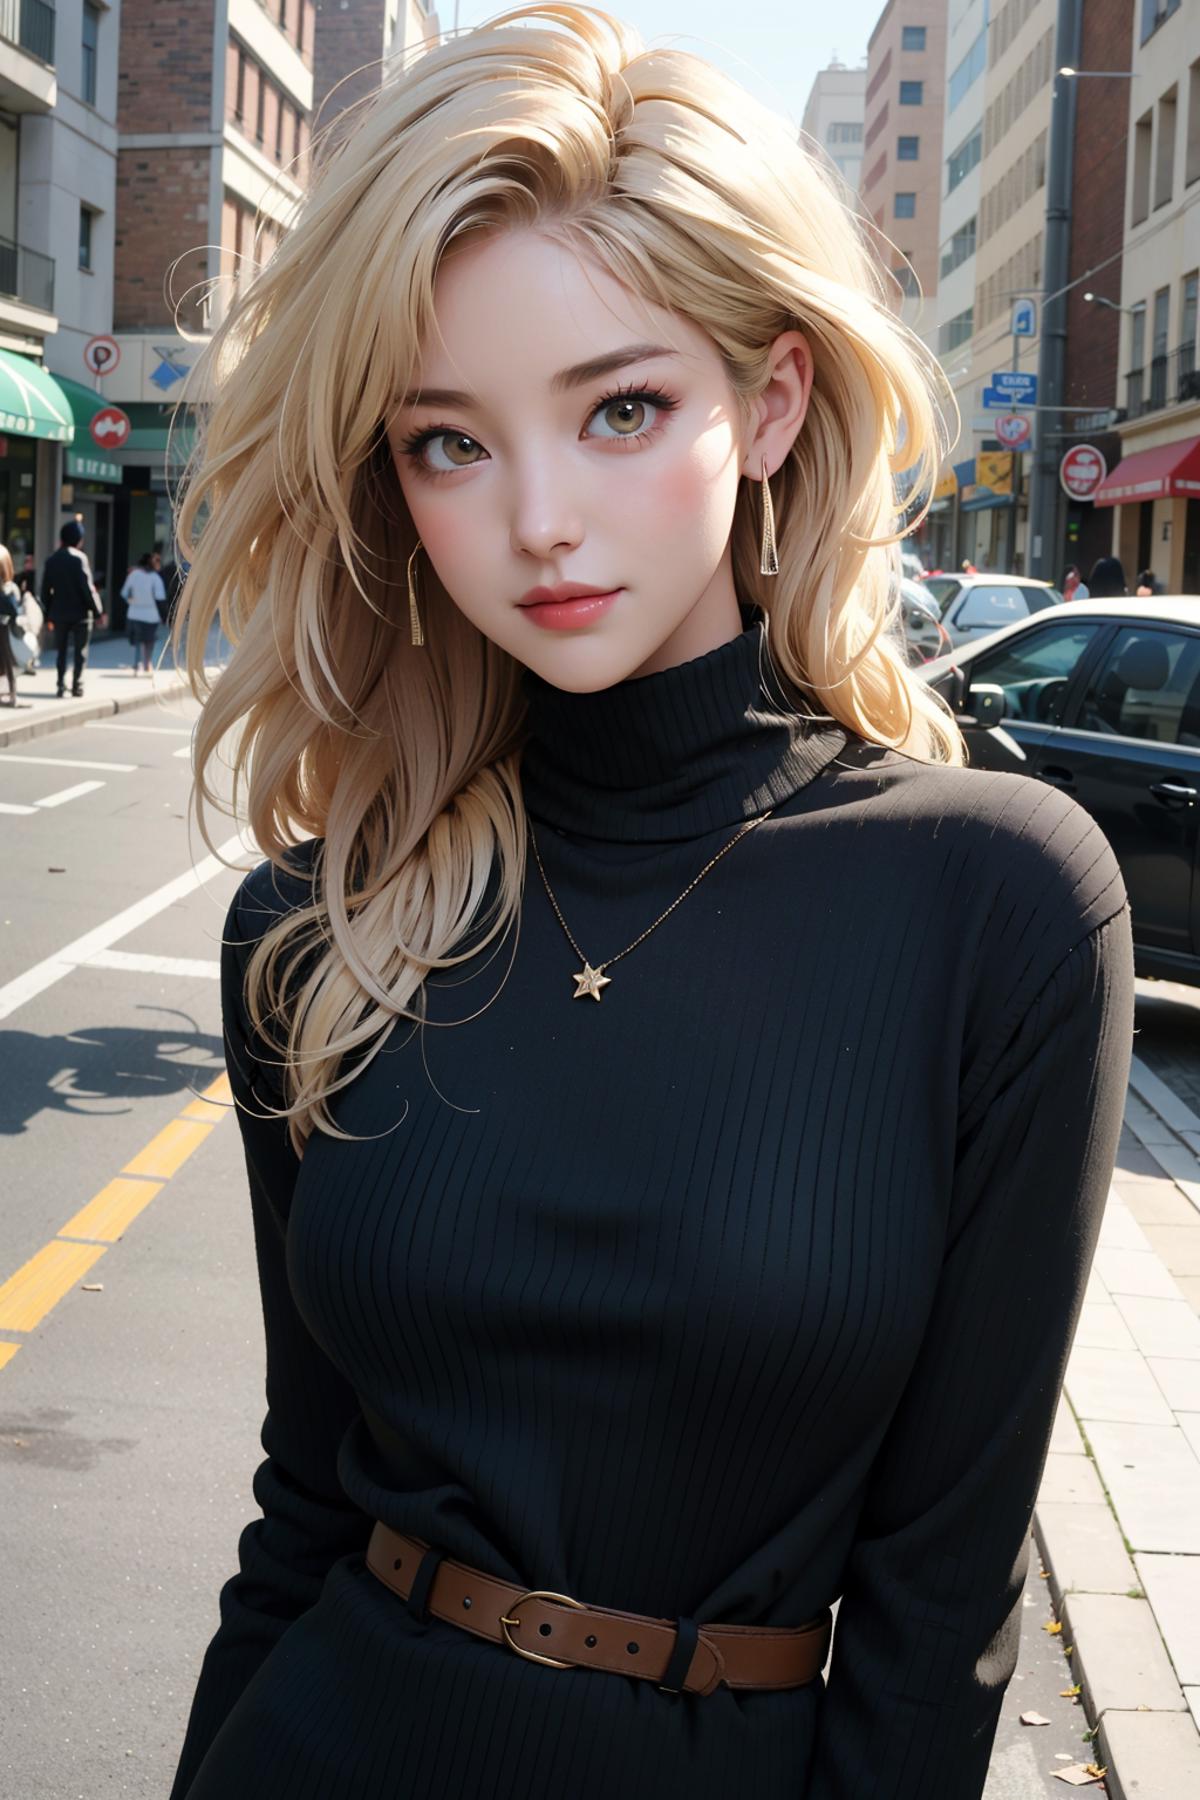 A pretty young woman wearing a black top and earrings posing on the street.